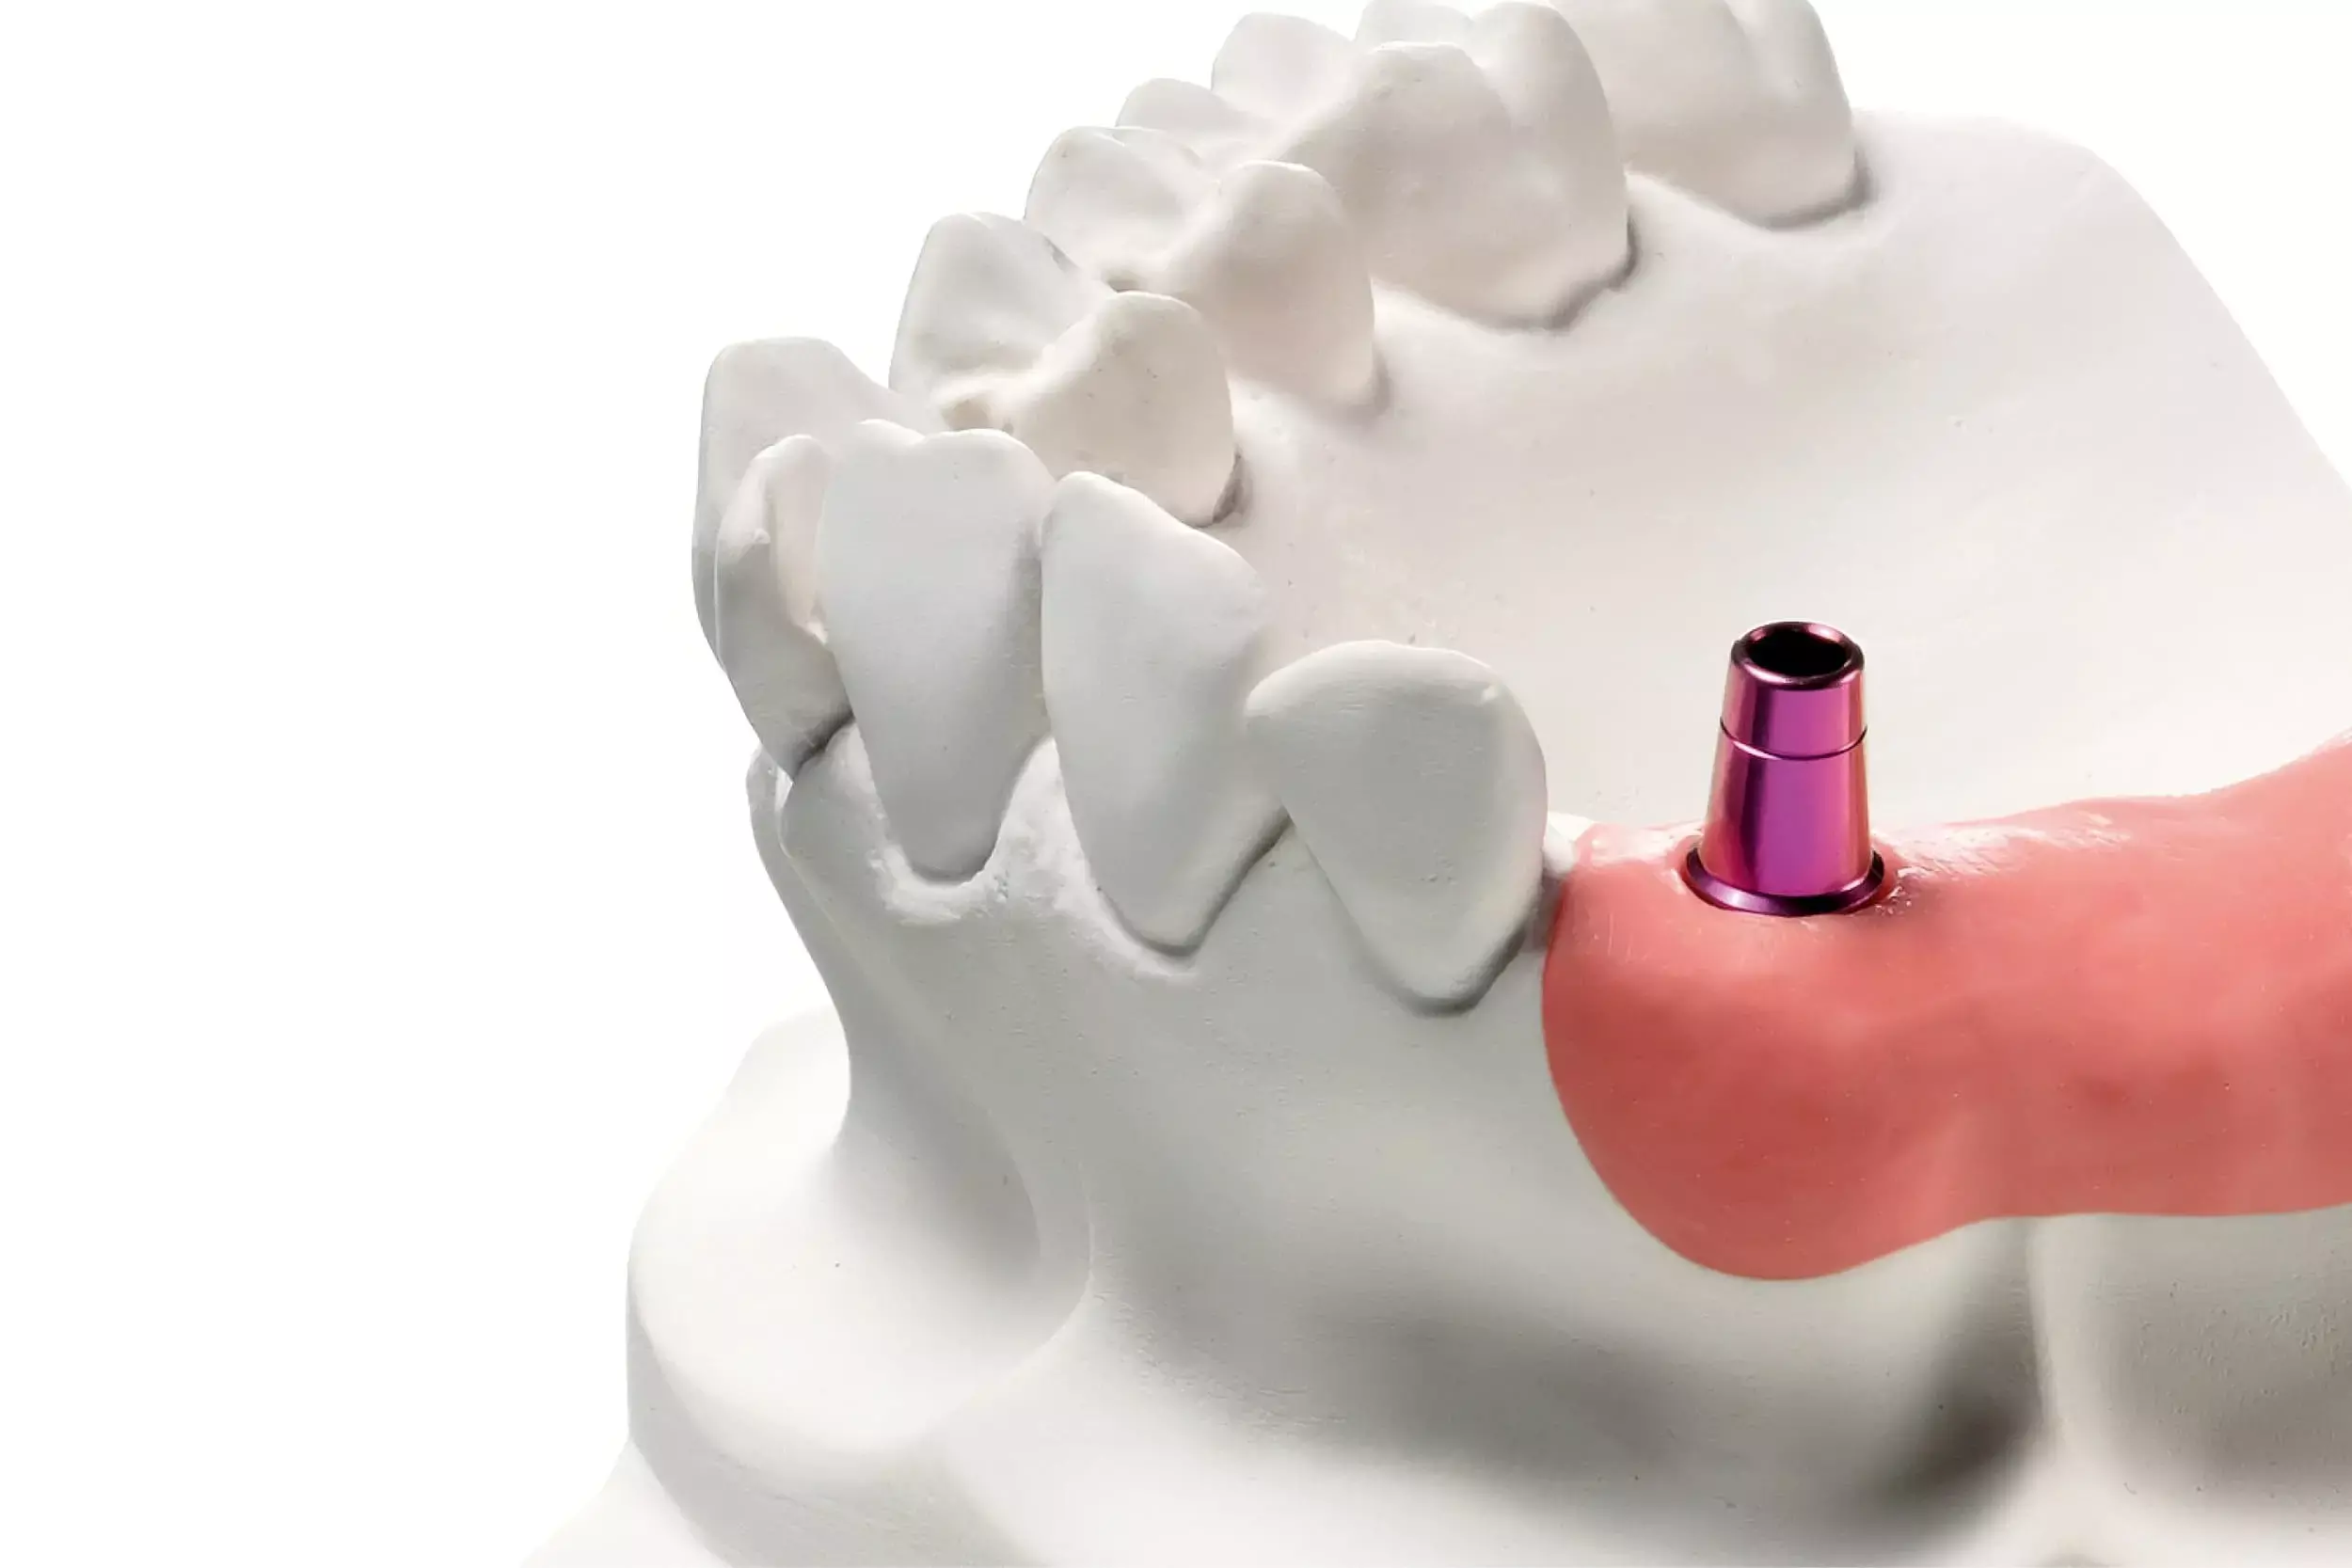 CAPS system may streamline fabrication process of implant supported fixed complete dental prostheses in one single visit: Study